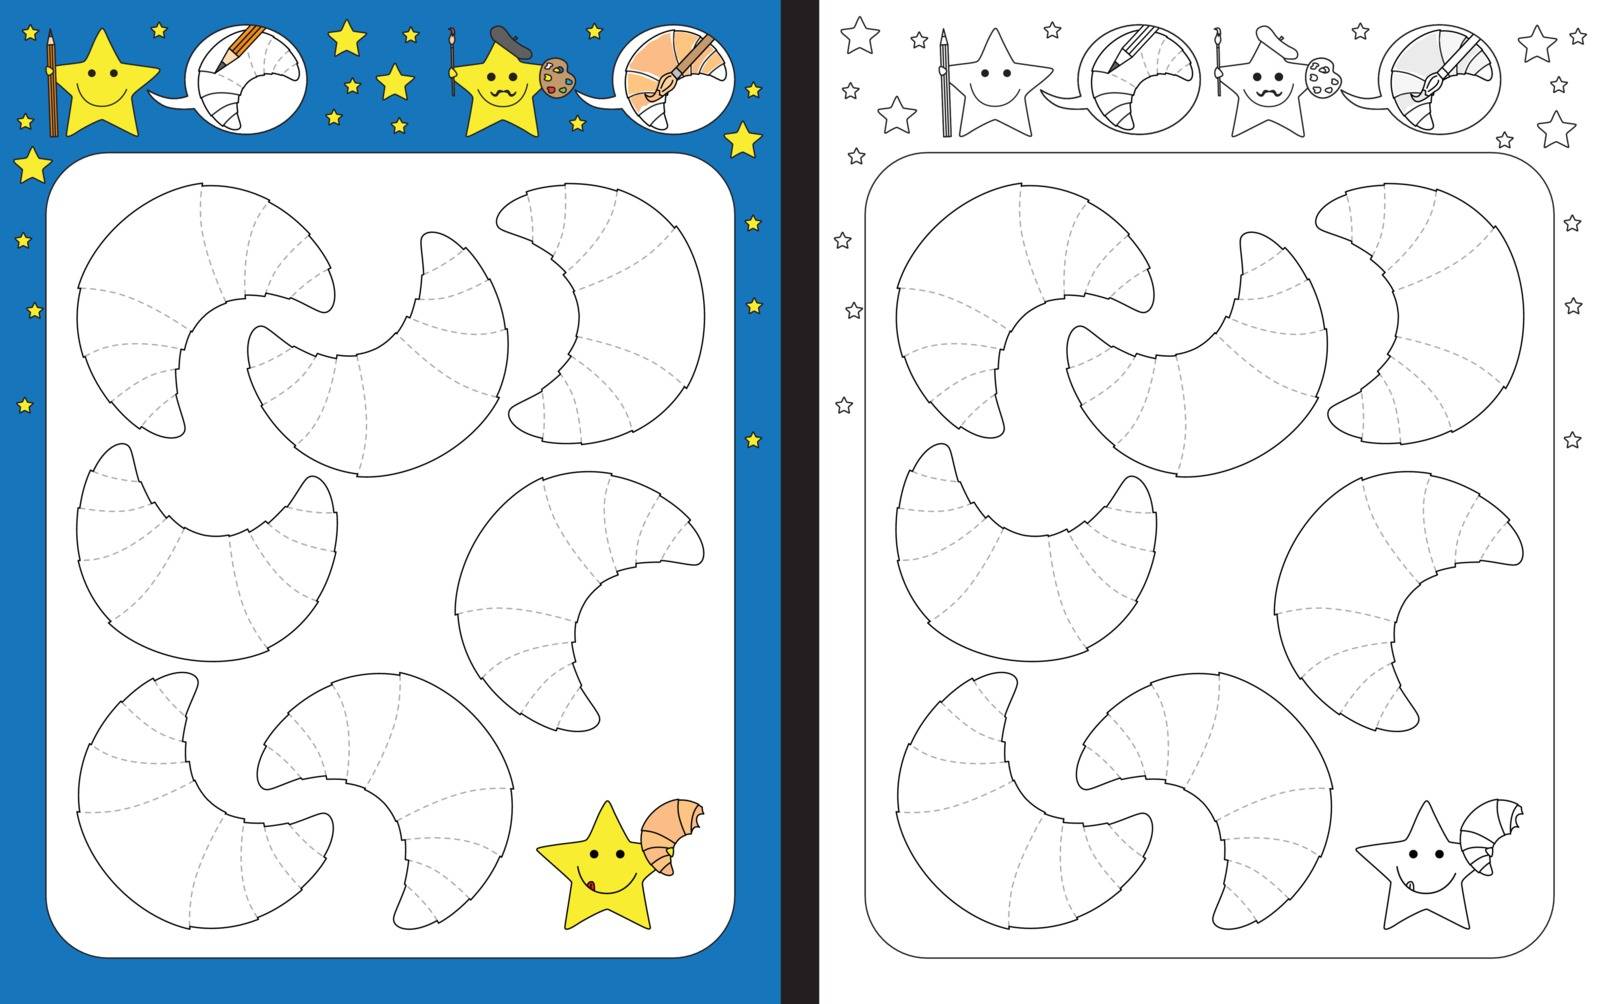 Preschool worksheet for practicing fine motor skills - tracing dashed lines of croissant folds